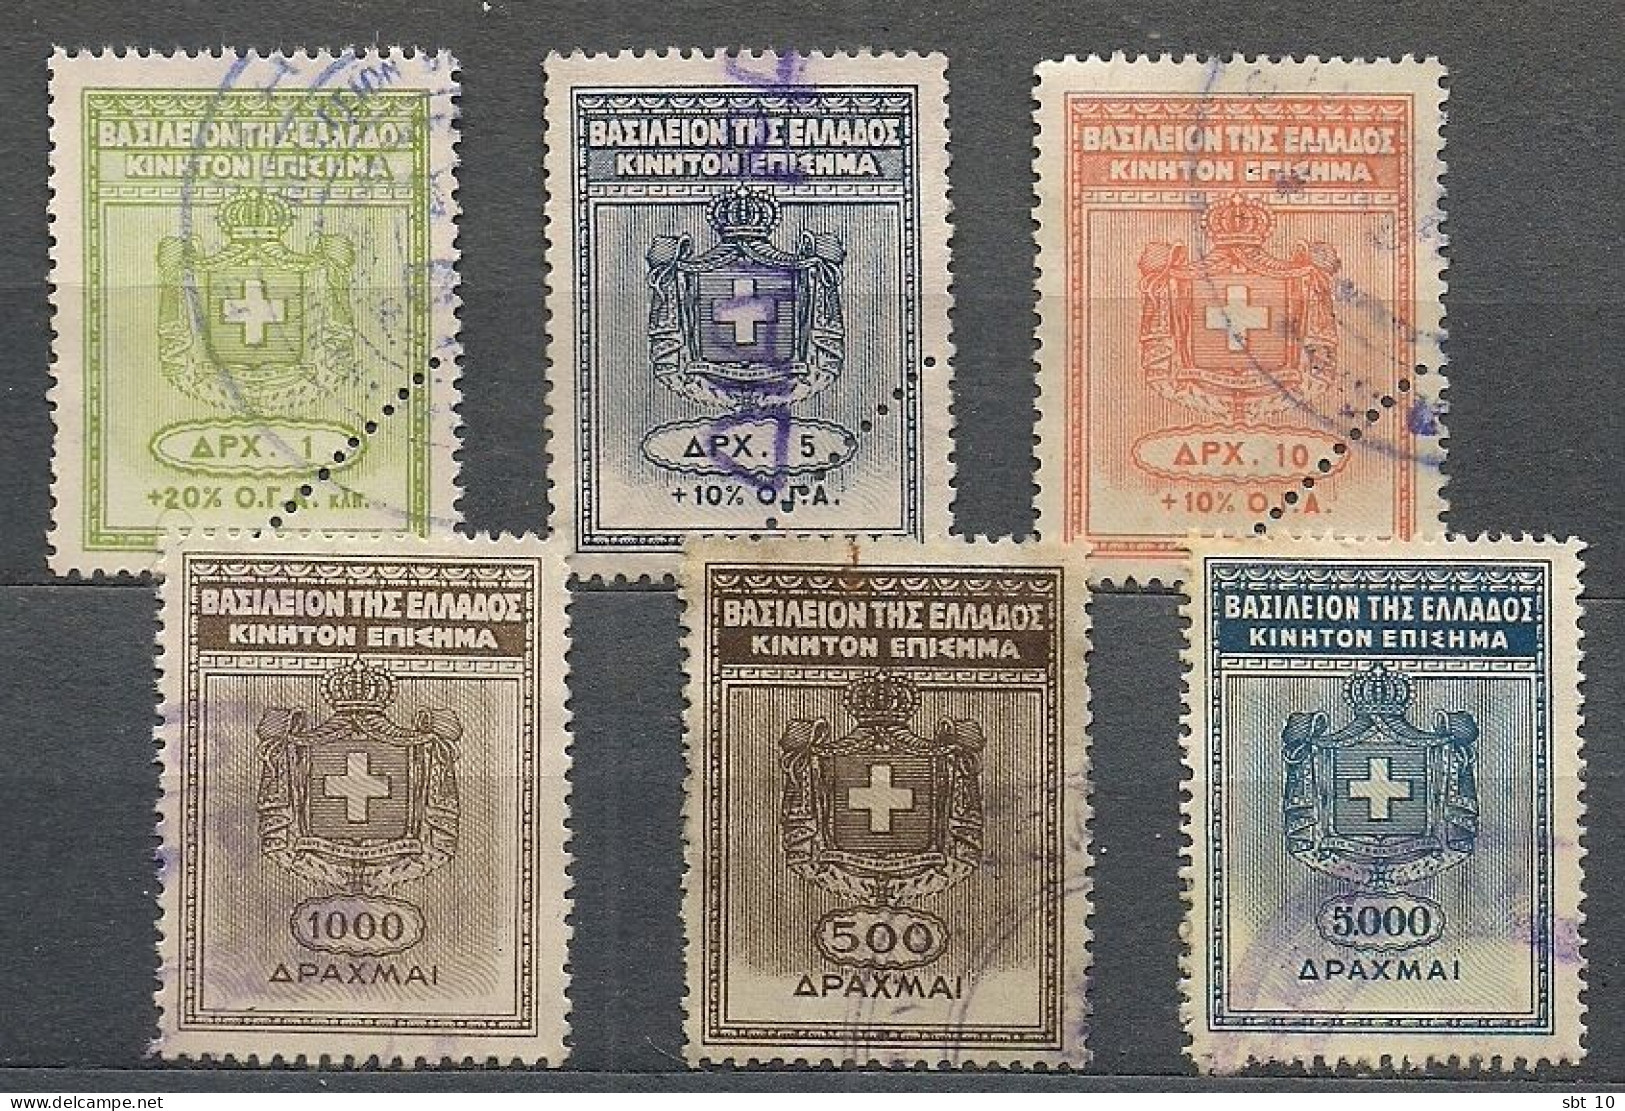 Greece - Kingdom Of Greece Revenue Stamp 6 Value - Used - Fiscale Zegels